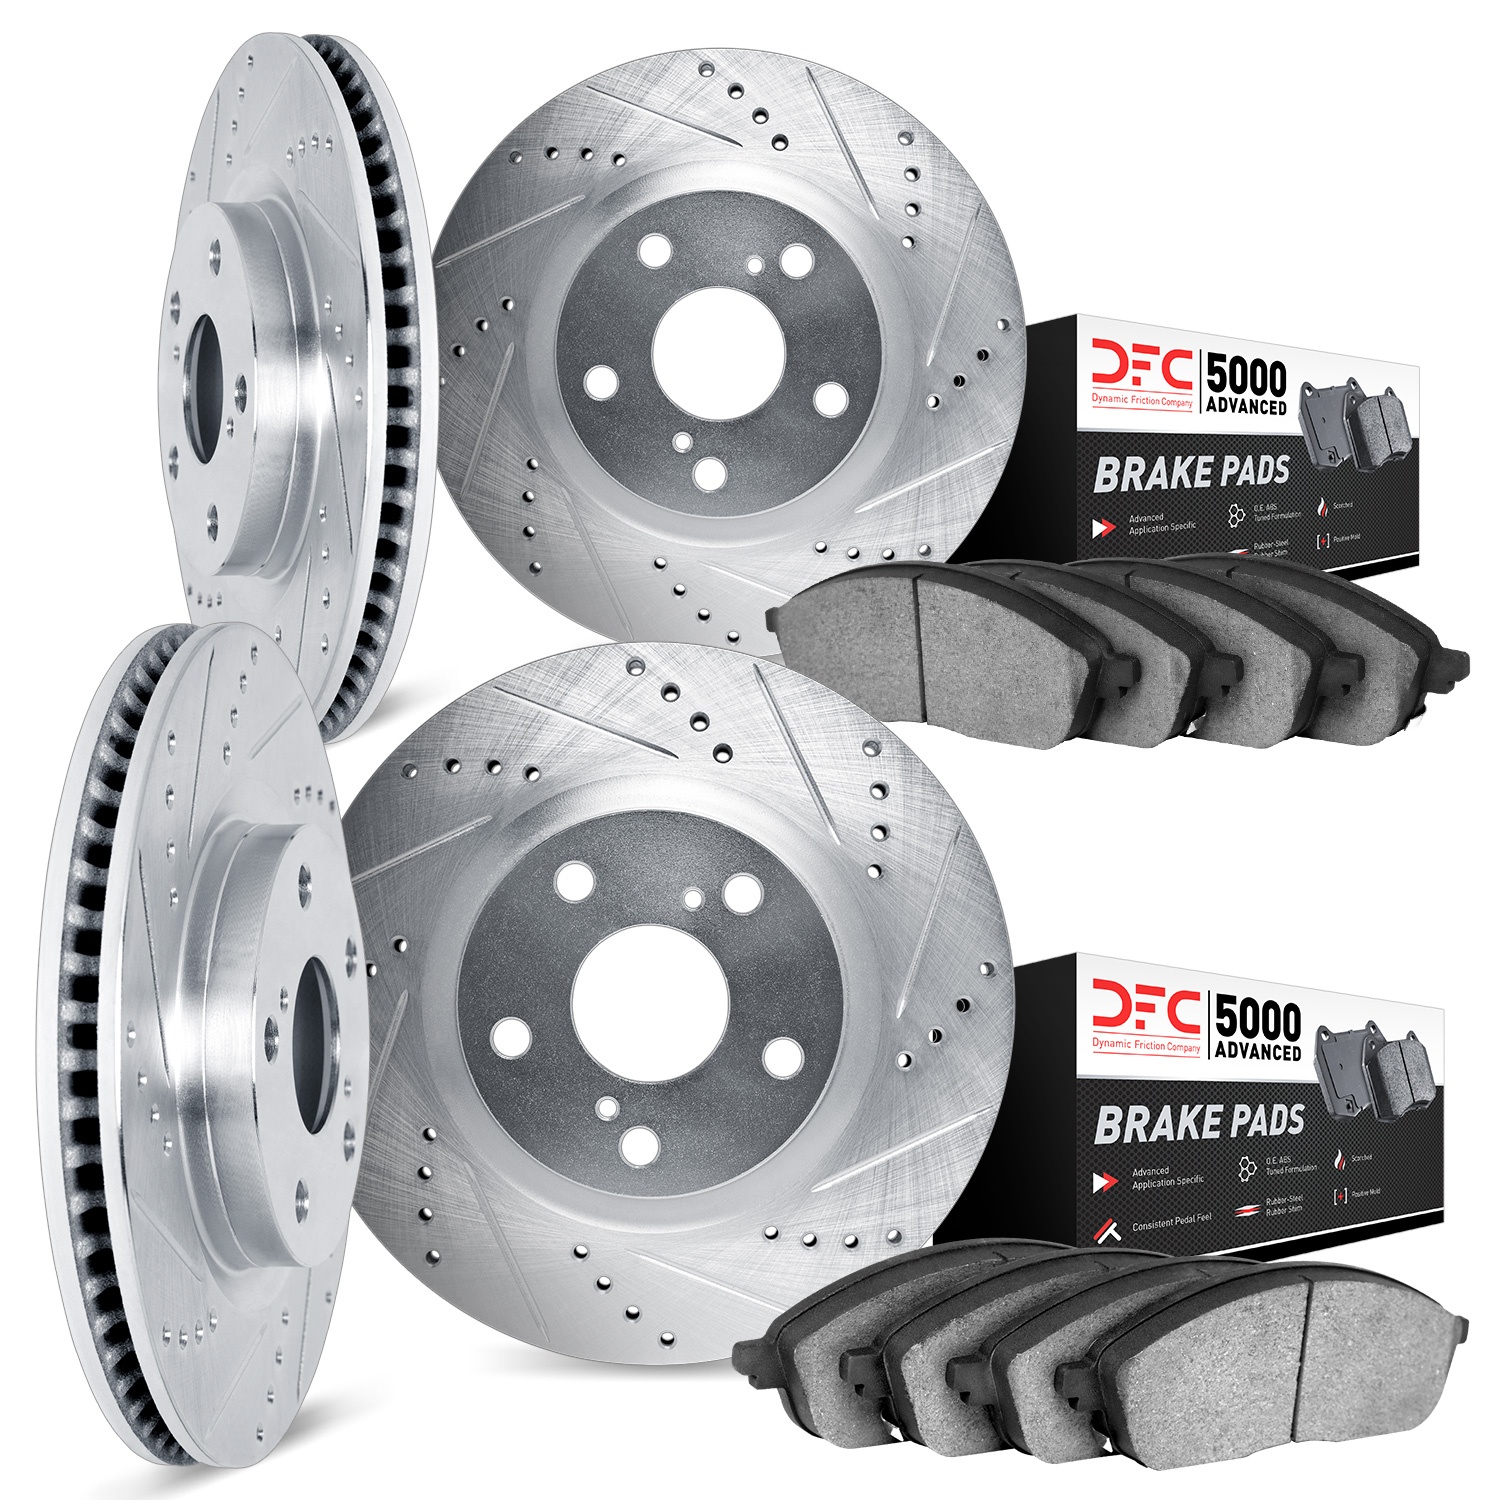 7504-72047 Drilled/Slotted Brake Rotors w/5000 Advanced Brake Pads Kit [Silver], 2003-2006 Mitsubishi, Position: Front and Rear